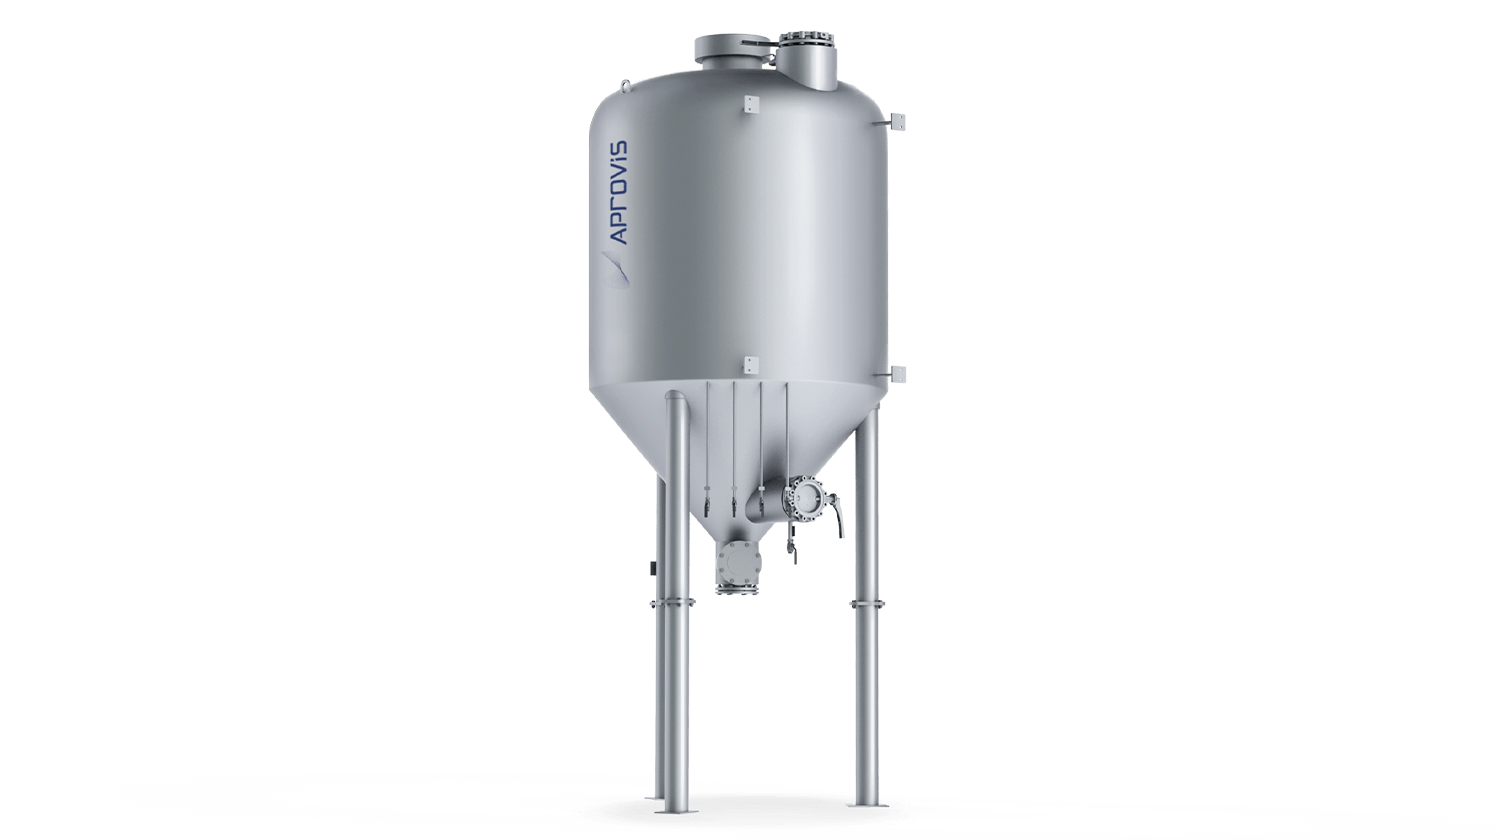 ActiCo-Pro gas treatment system